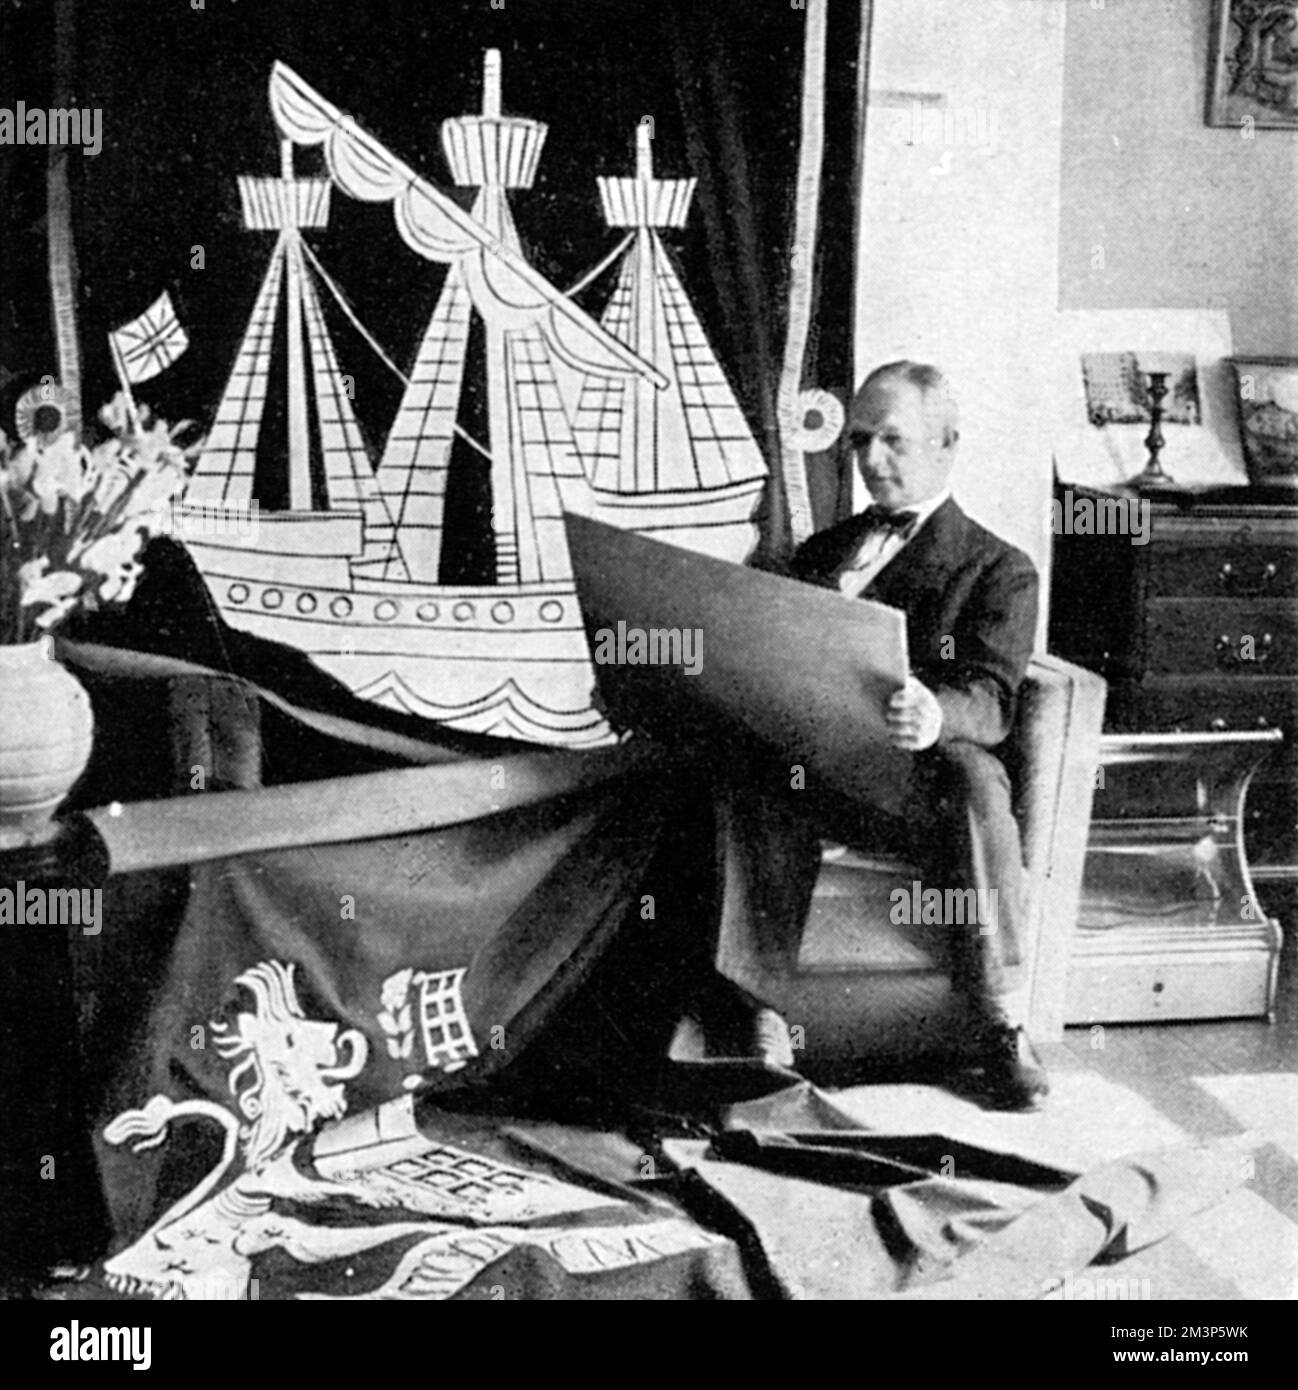 George Grey Wornum (1888-1957), British architect, pictured at his drawing board in the midst of designing street decorations around London for the Coronation of King George VI in 1937.     Date: 1937 Stock Photo